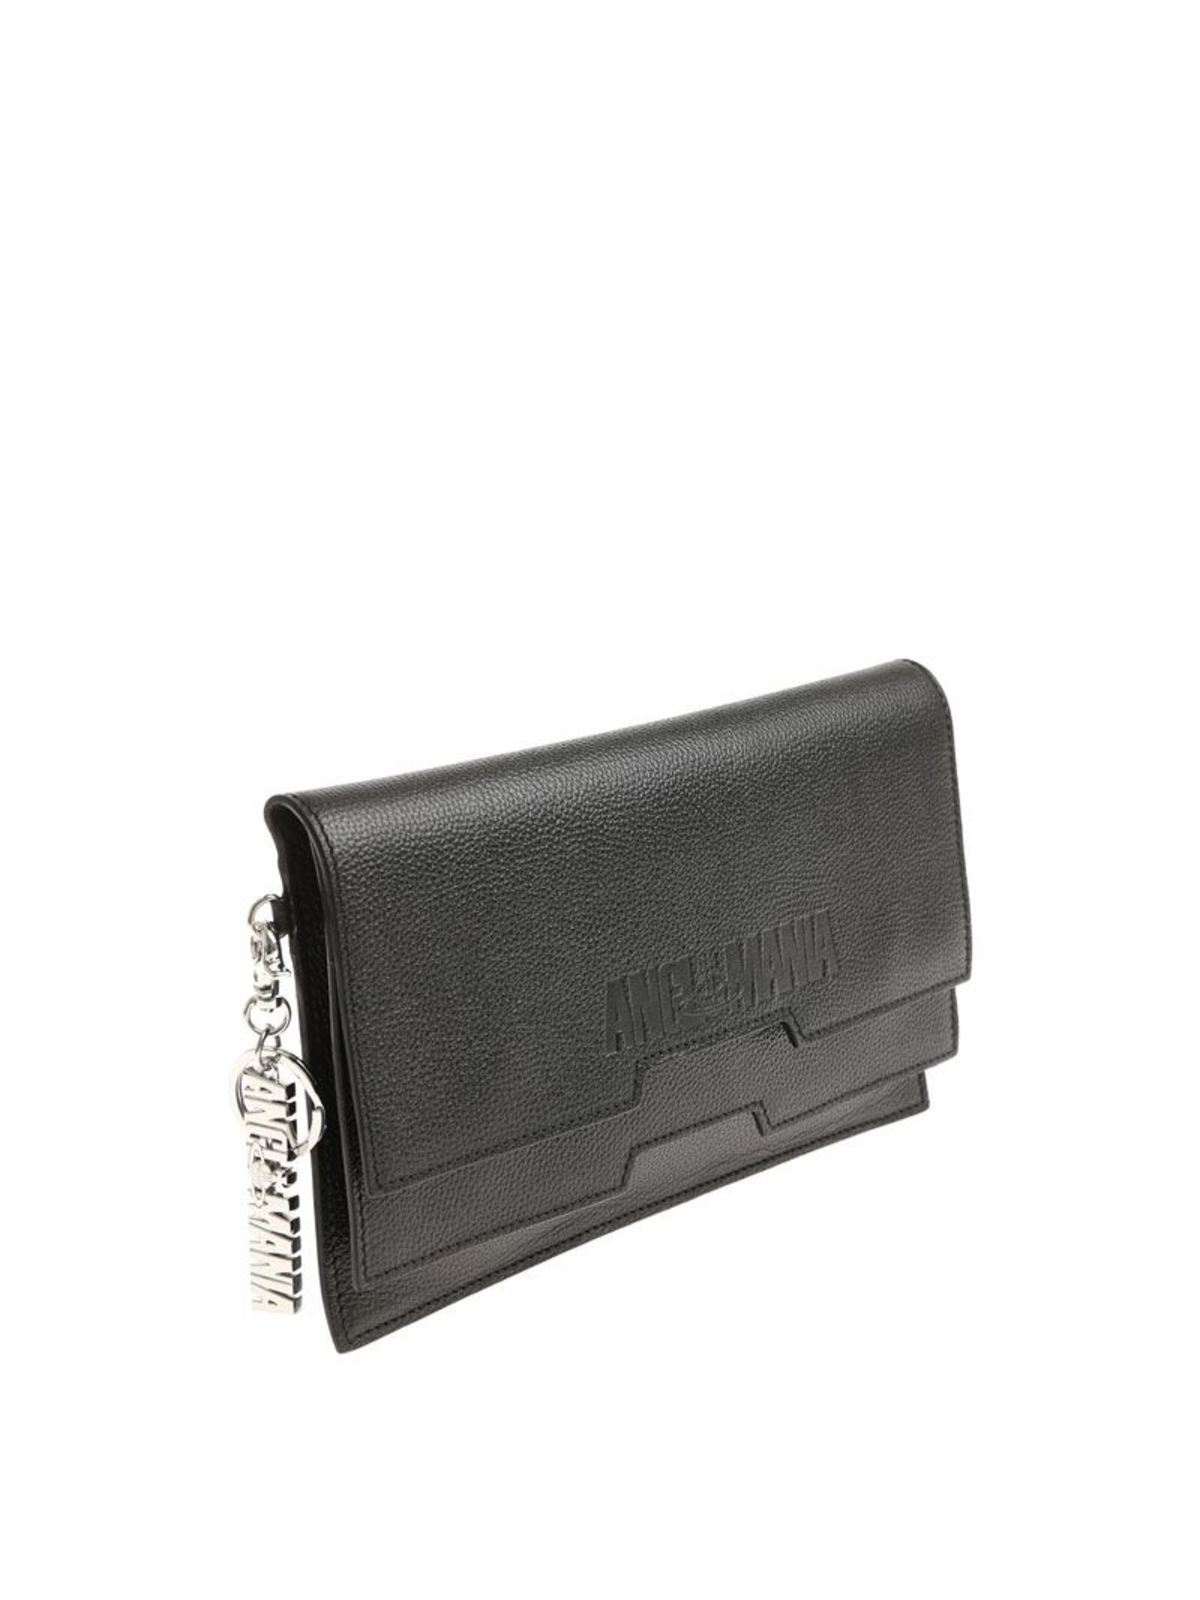 Shop Vivienne Westwood Anglomania Bolso Clutch - Negro